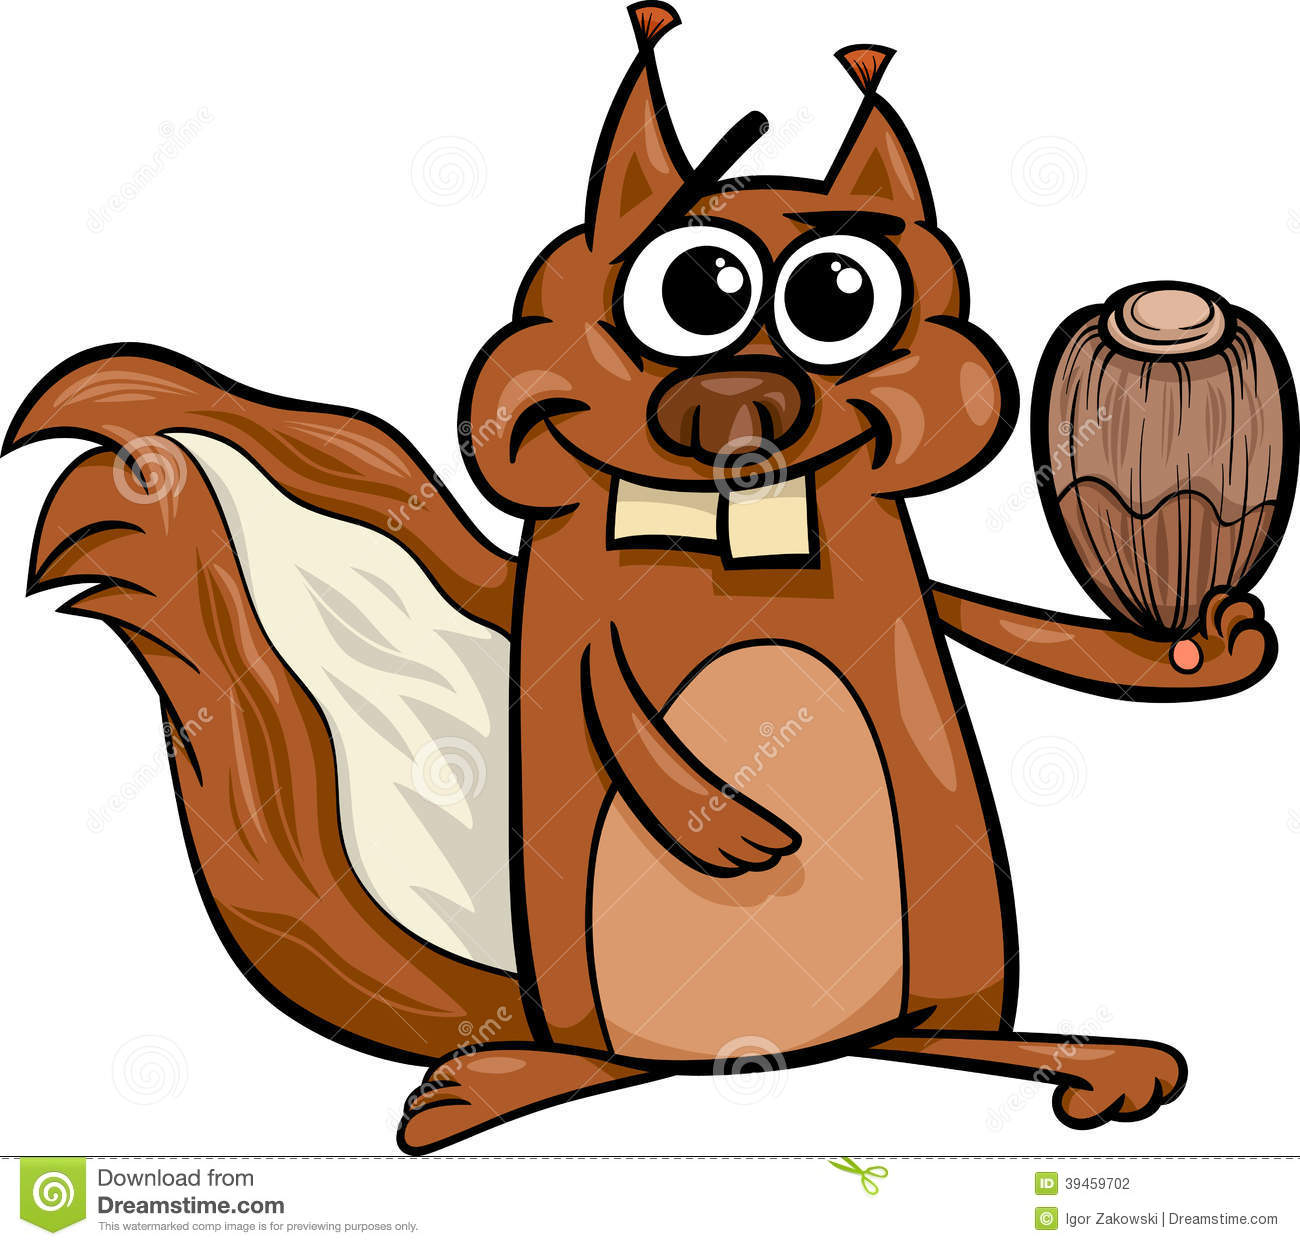 Cartoon Illustration Of Funny Squirrel Rodent Animal Character With